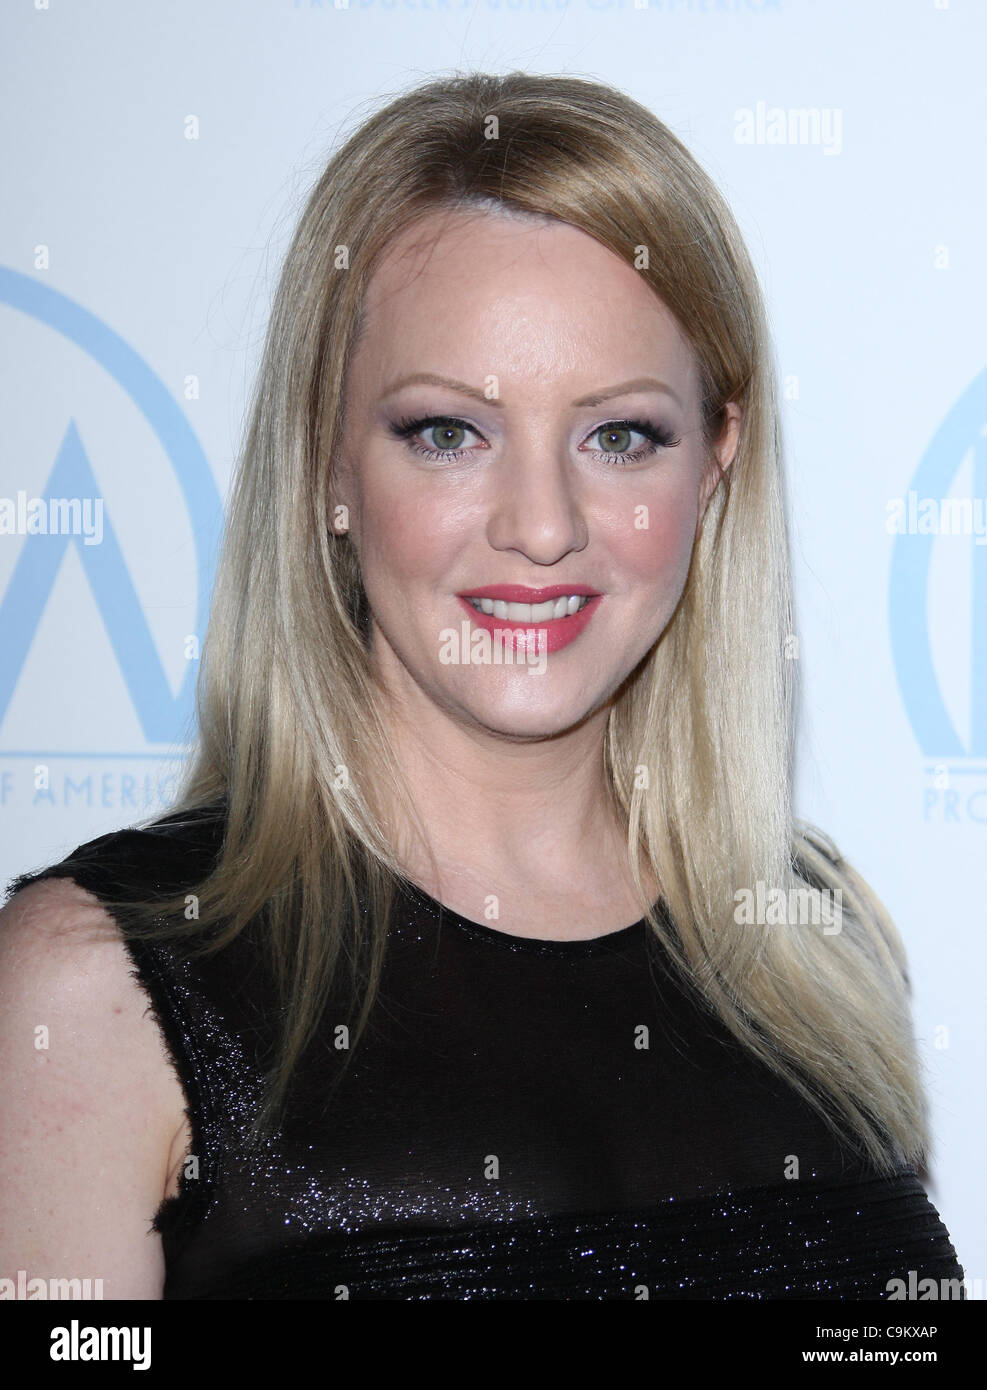 WENDI MCLENDON-COVEY 23RD ANNUAL PRODUCERS GUILD OF AMERICA AWARDS BEVERLY HILLS CALIFORNIA USA 21 January 2012 Stock Photo